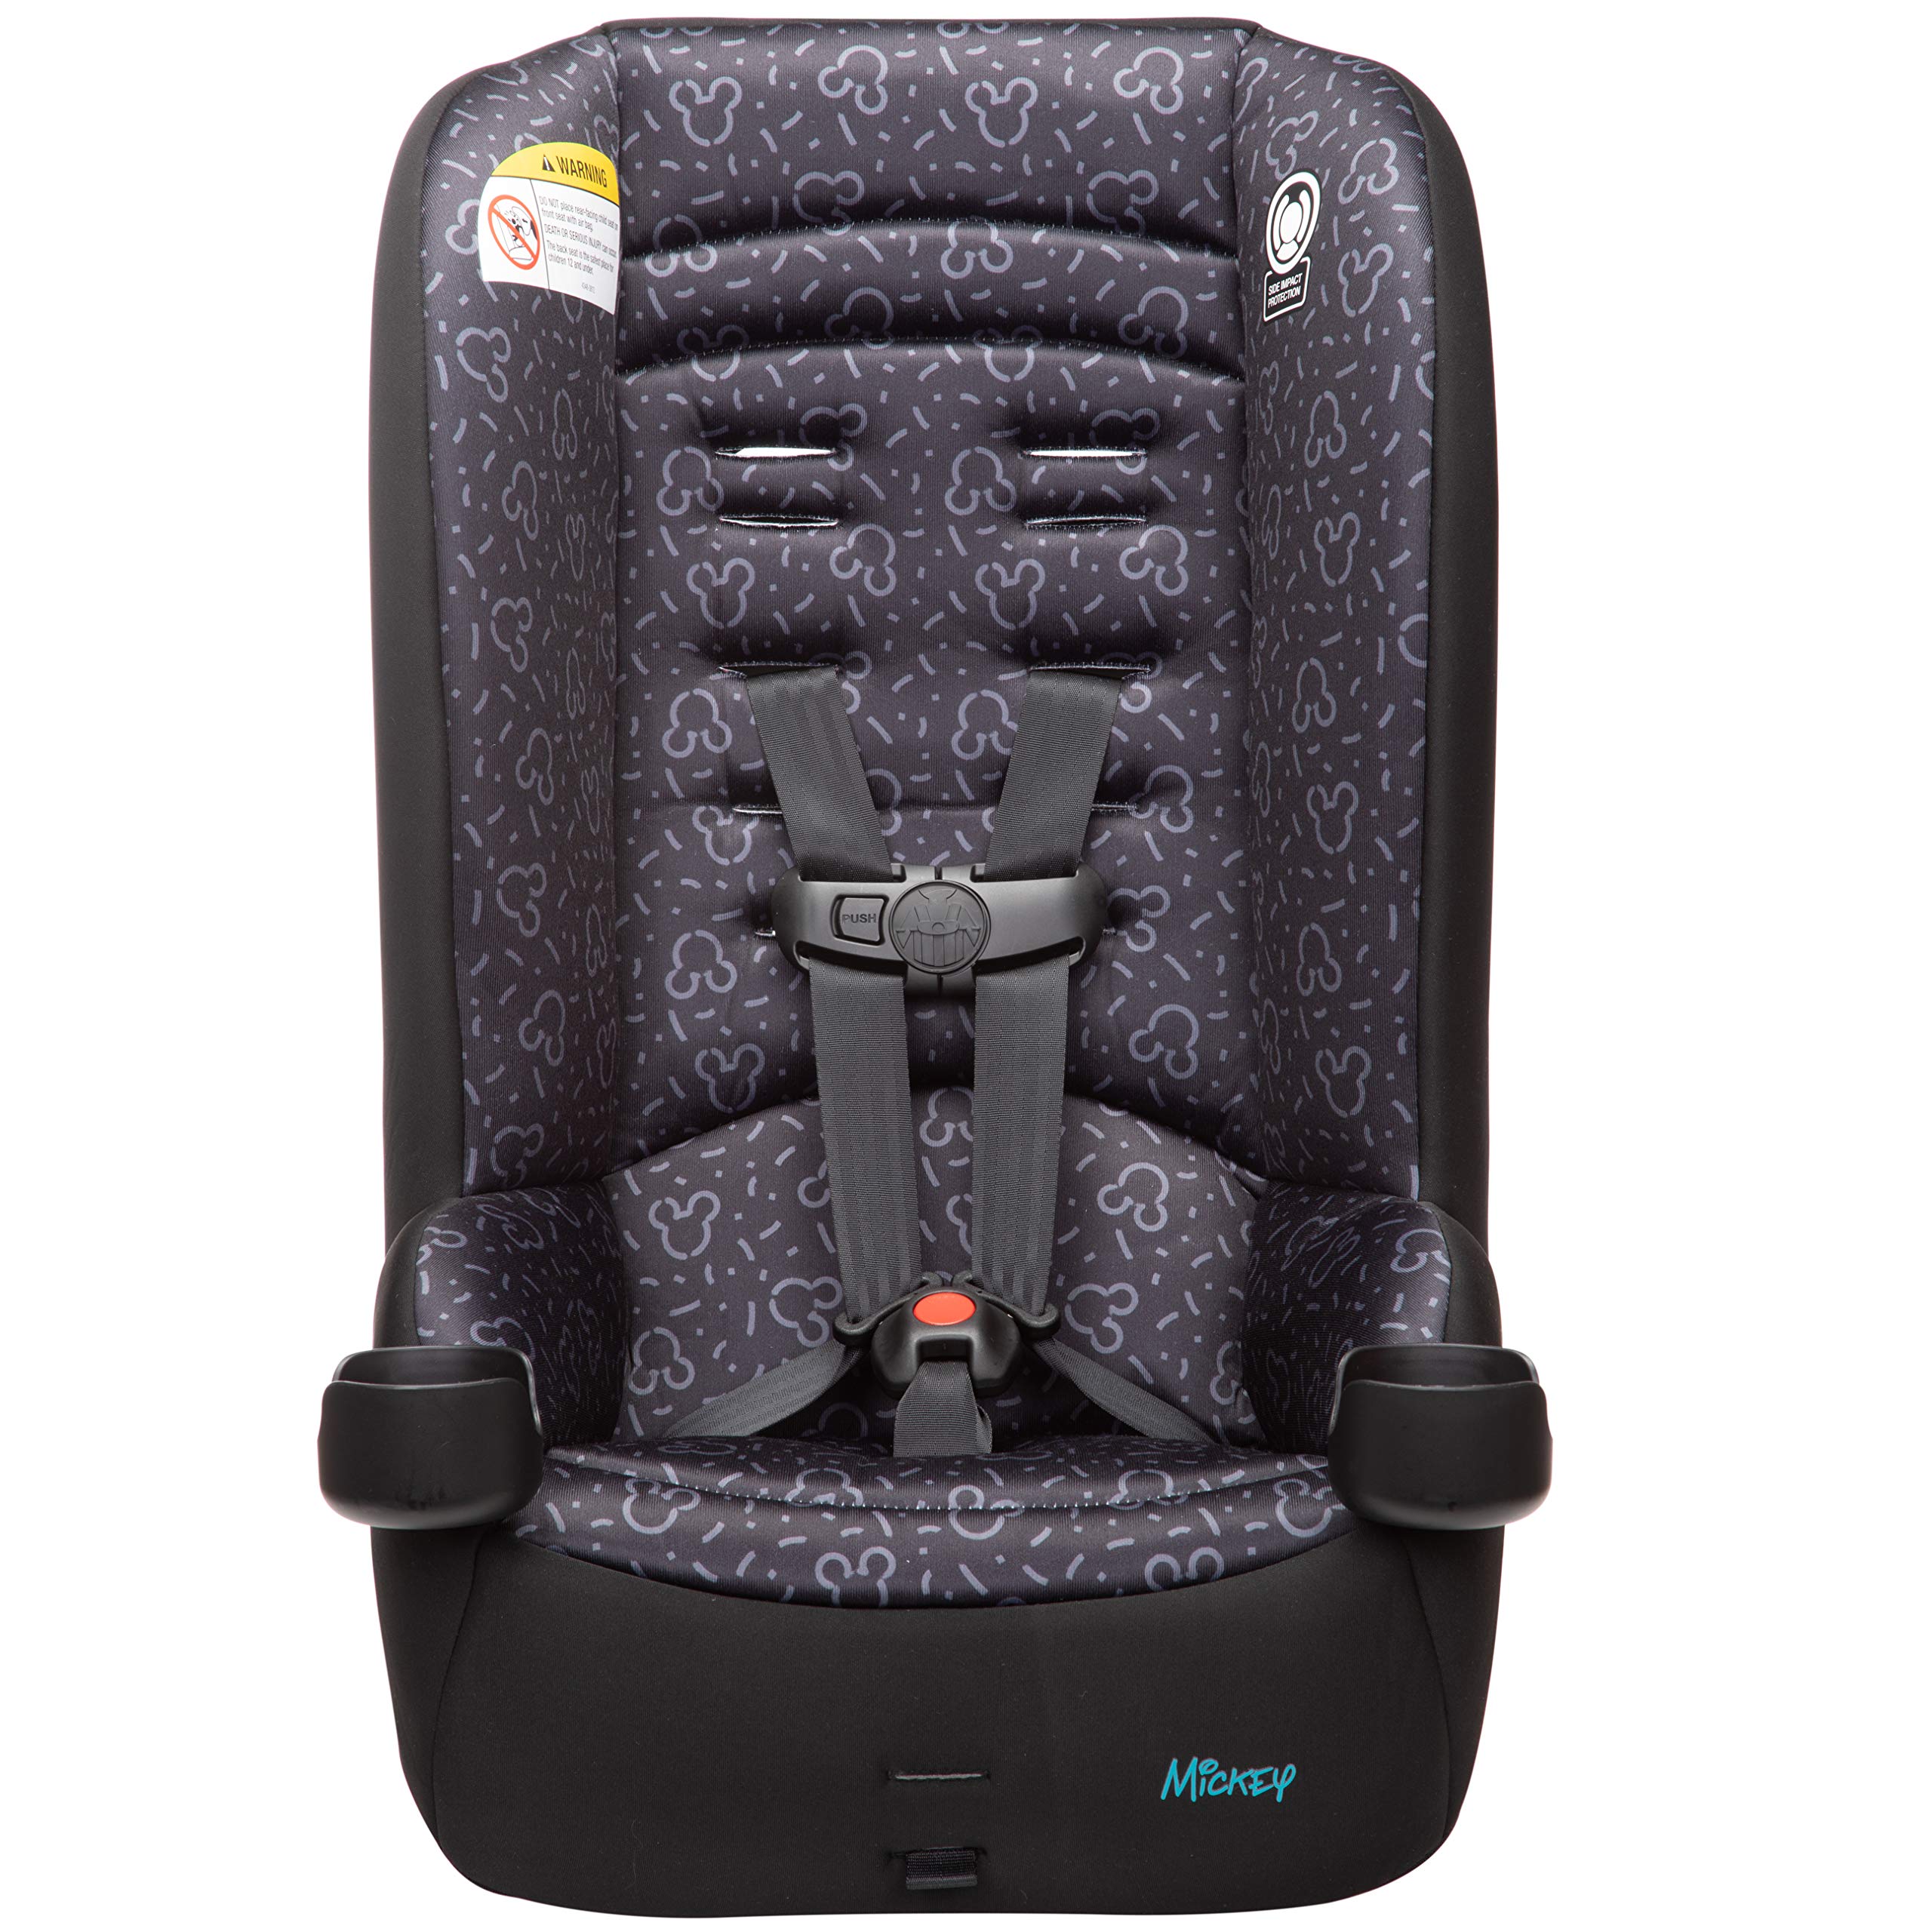 Disney Baby Jive 2 in 1 Convertible Car Seat,Rear-Facing 5-40 pounds and Forward-Facing 22-65 pounds, Mickey Teal